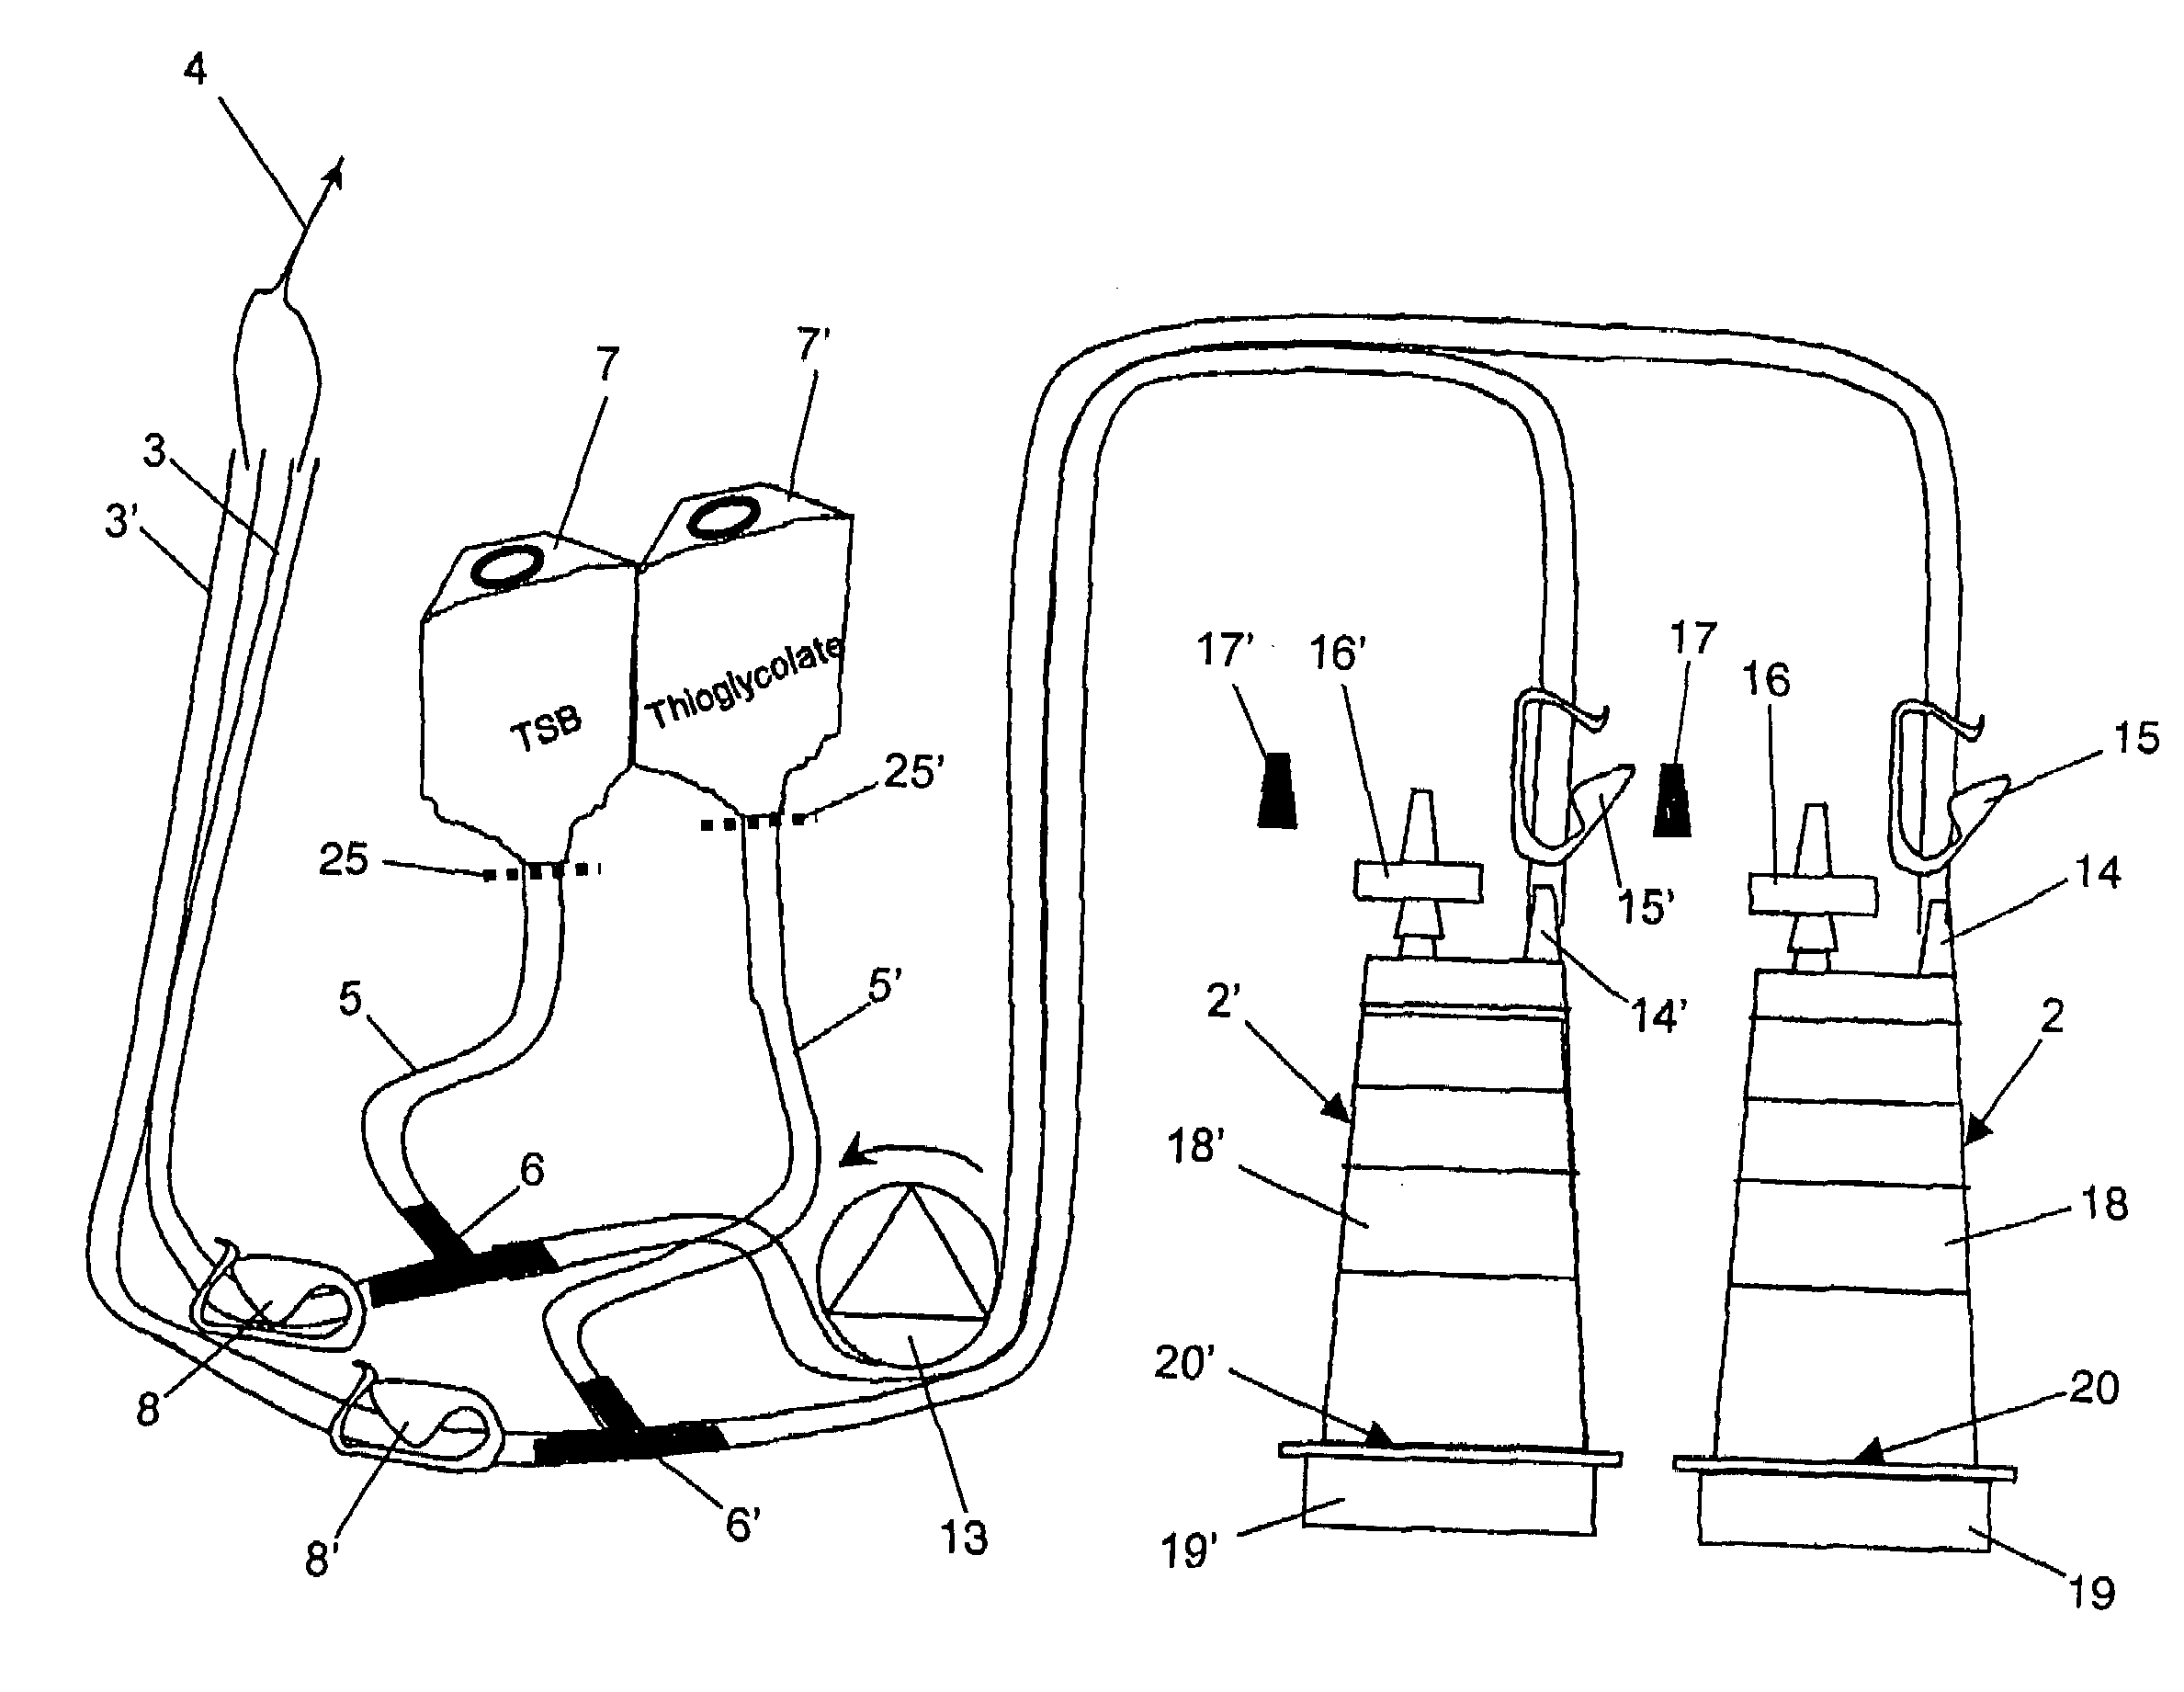 Device and method for sterility testing